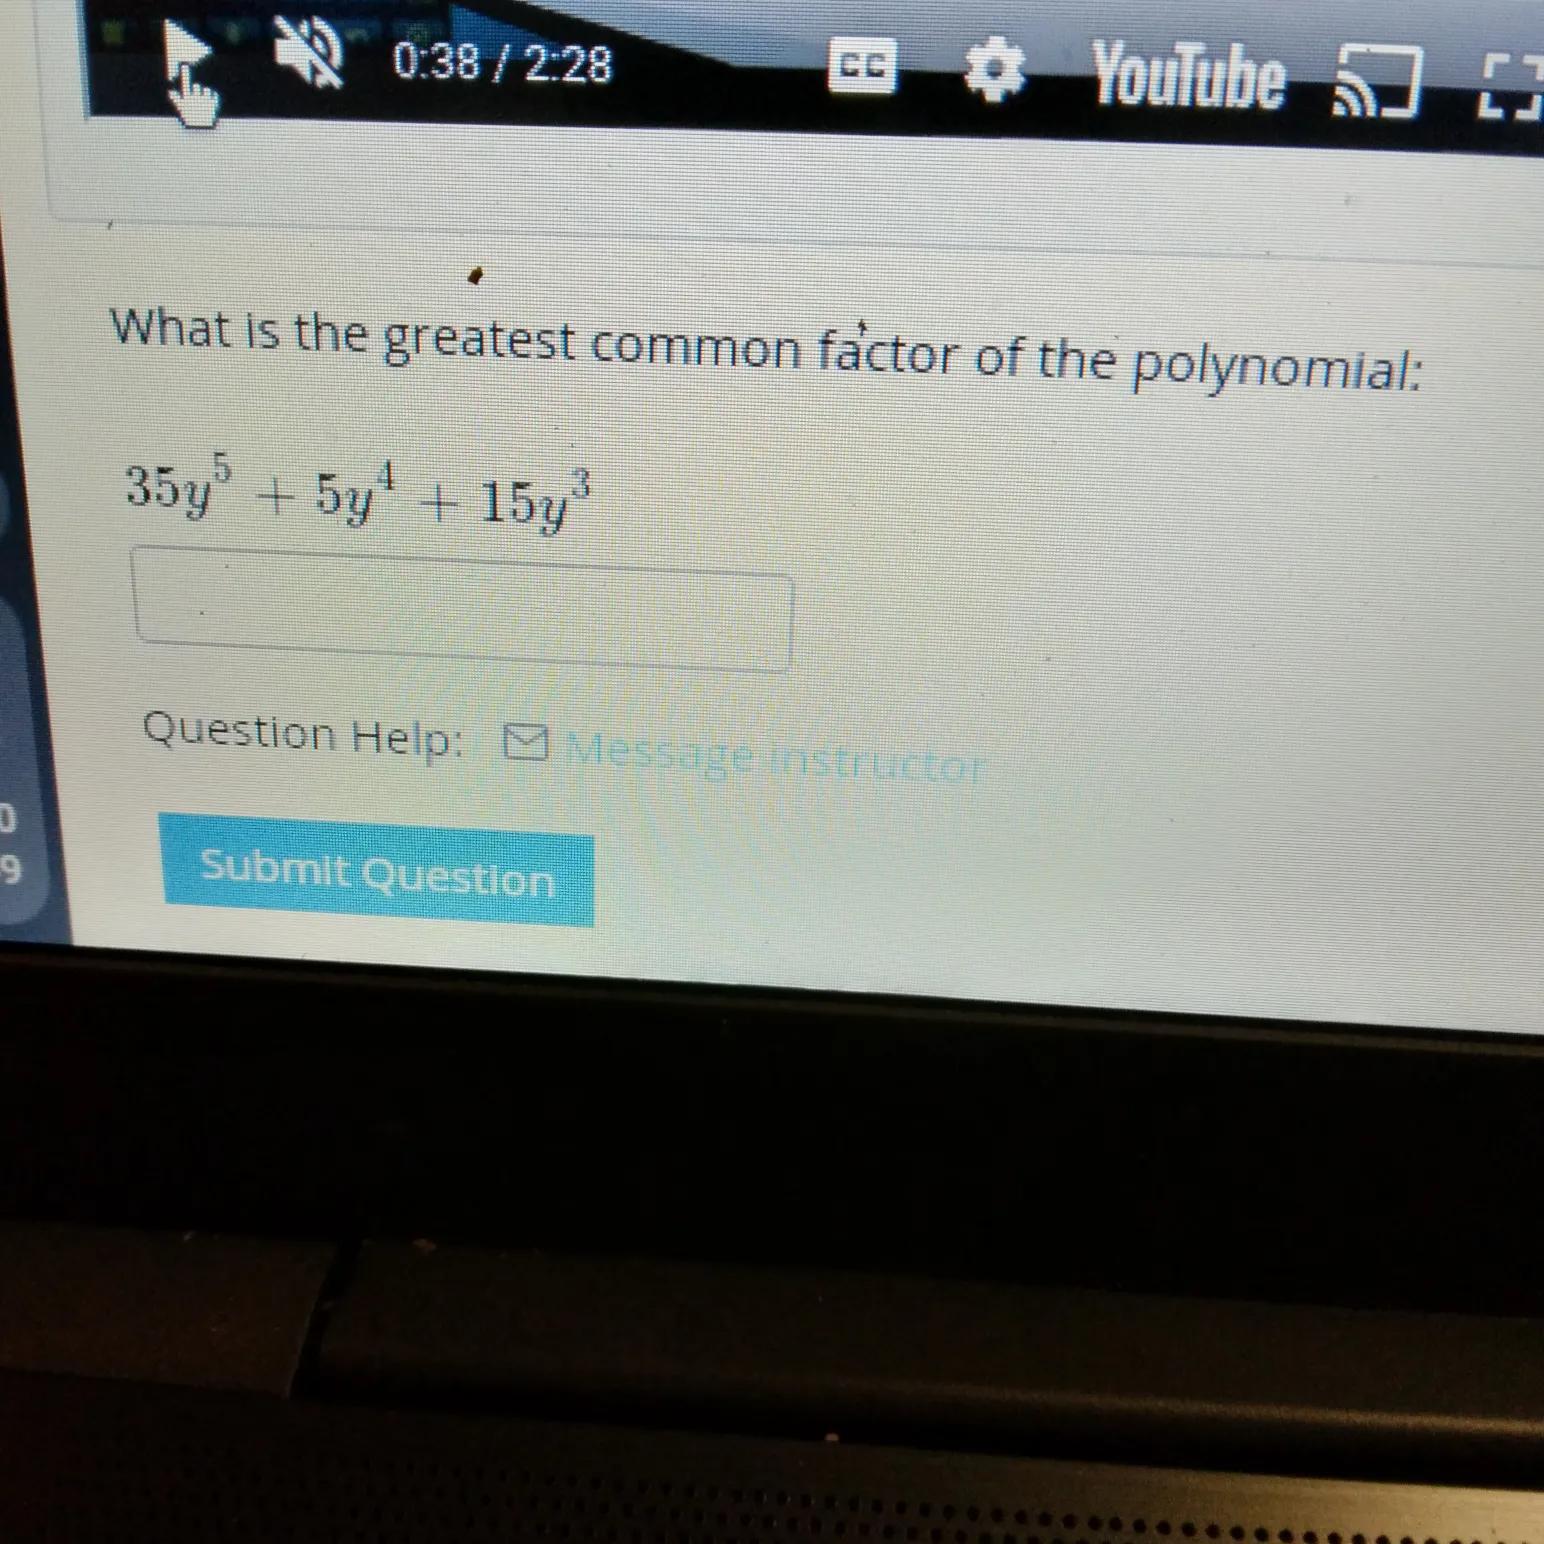 What Is The Greatest Common Factor Of The Polynomial: 35y + 5y + 157 "